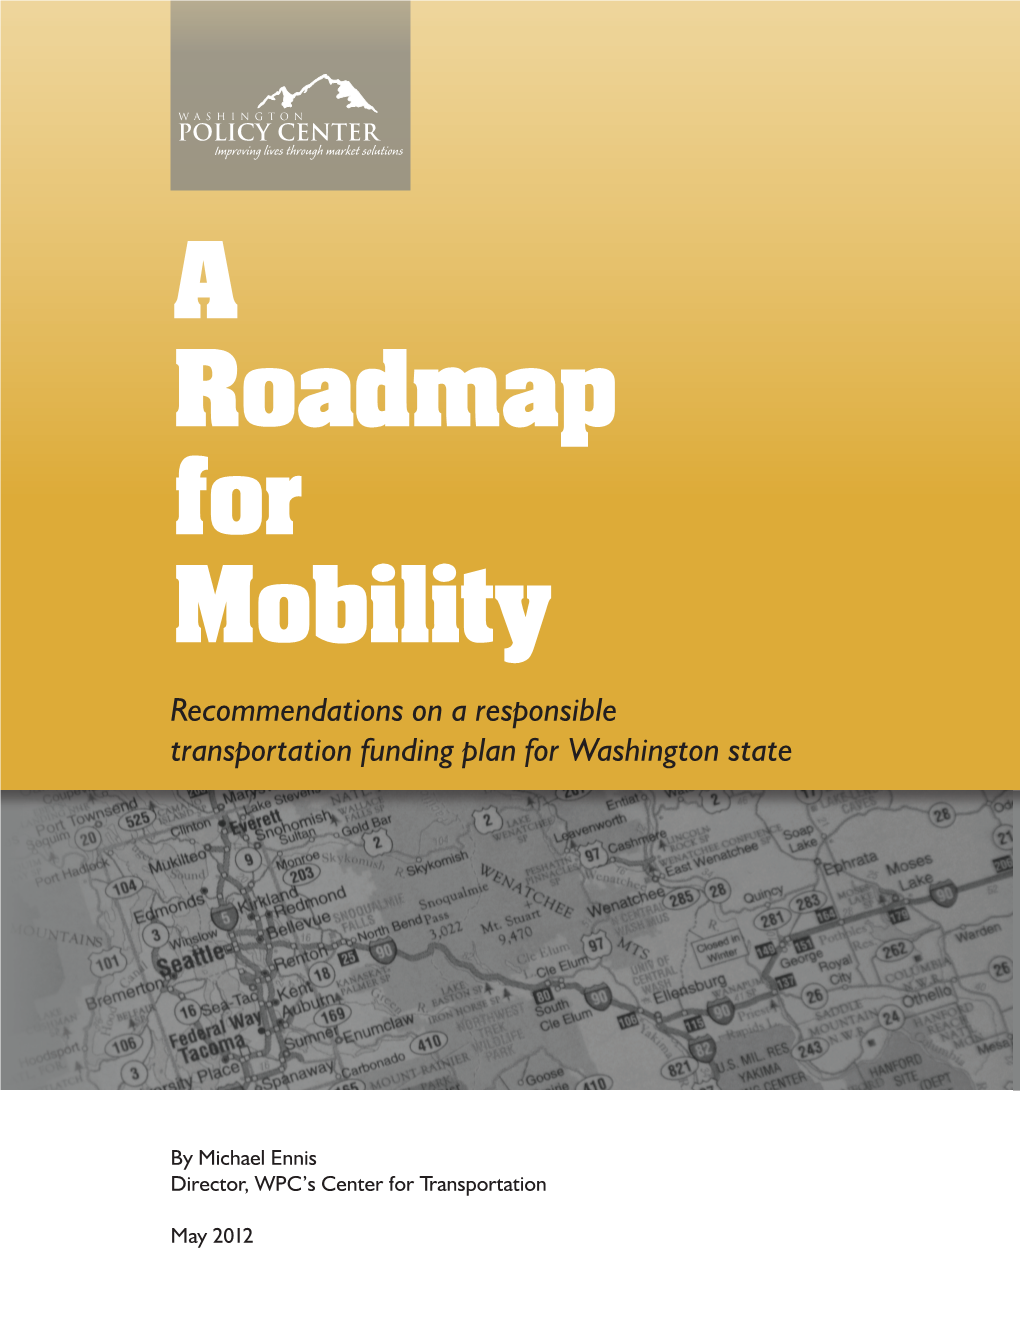 A Roadmap for Mobility Recommendations on a Responsible Transportation Funding Plan for Washington State